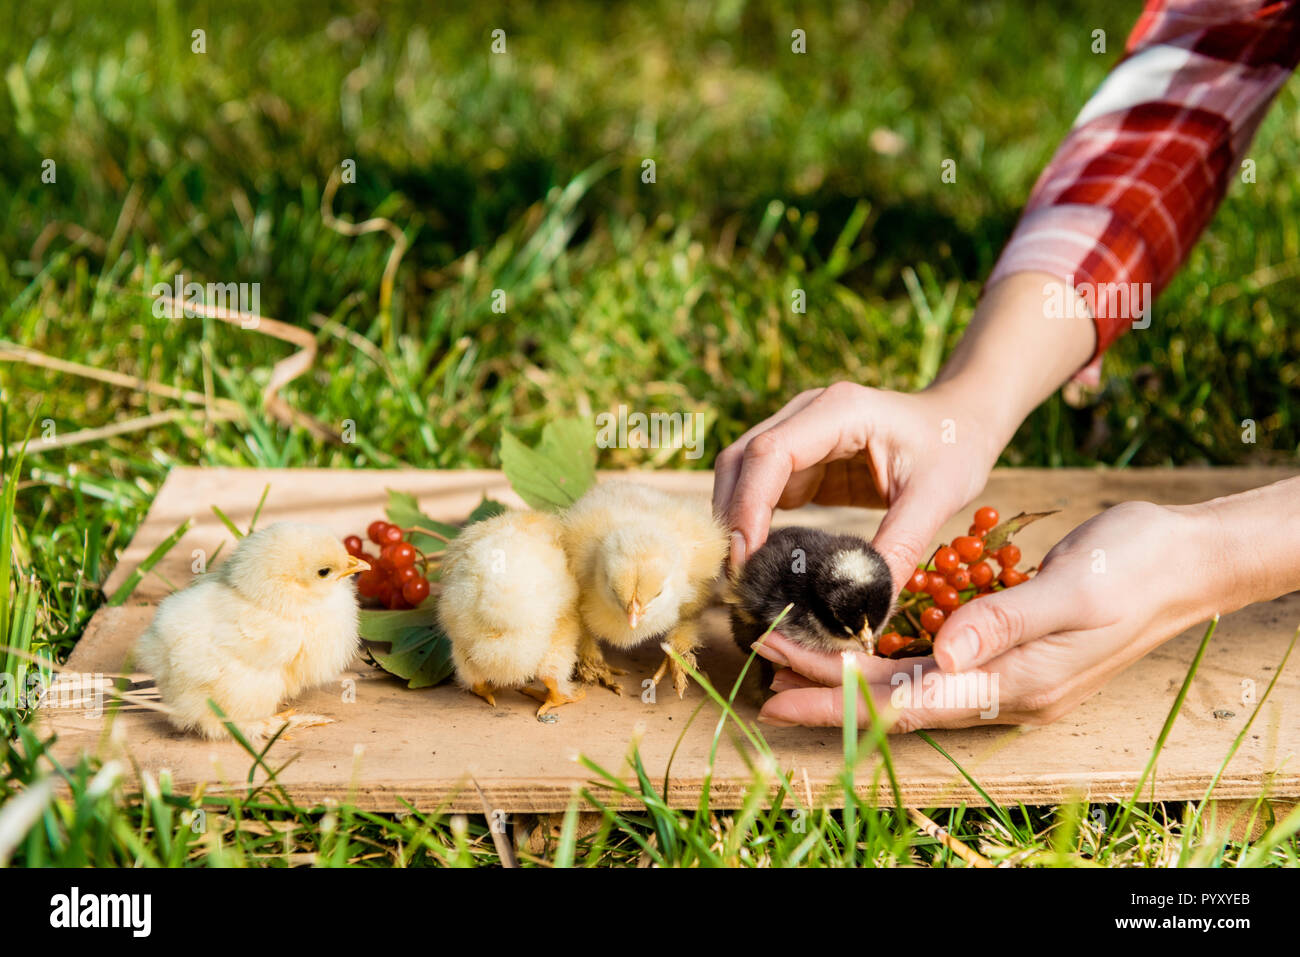 partial view of female farmer with baby chicks and rowan on wooden board outdoors Stock Photo